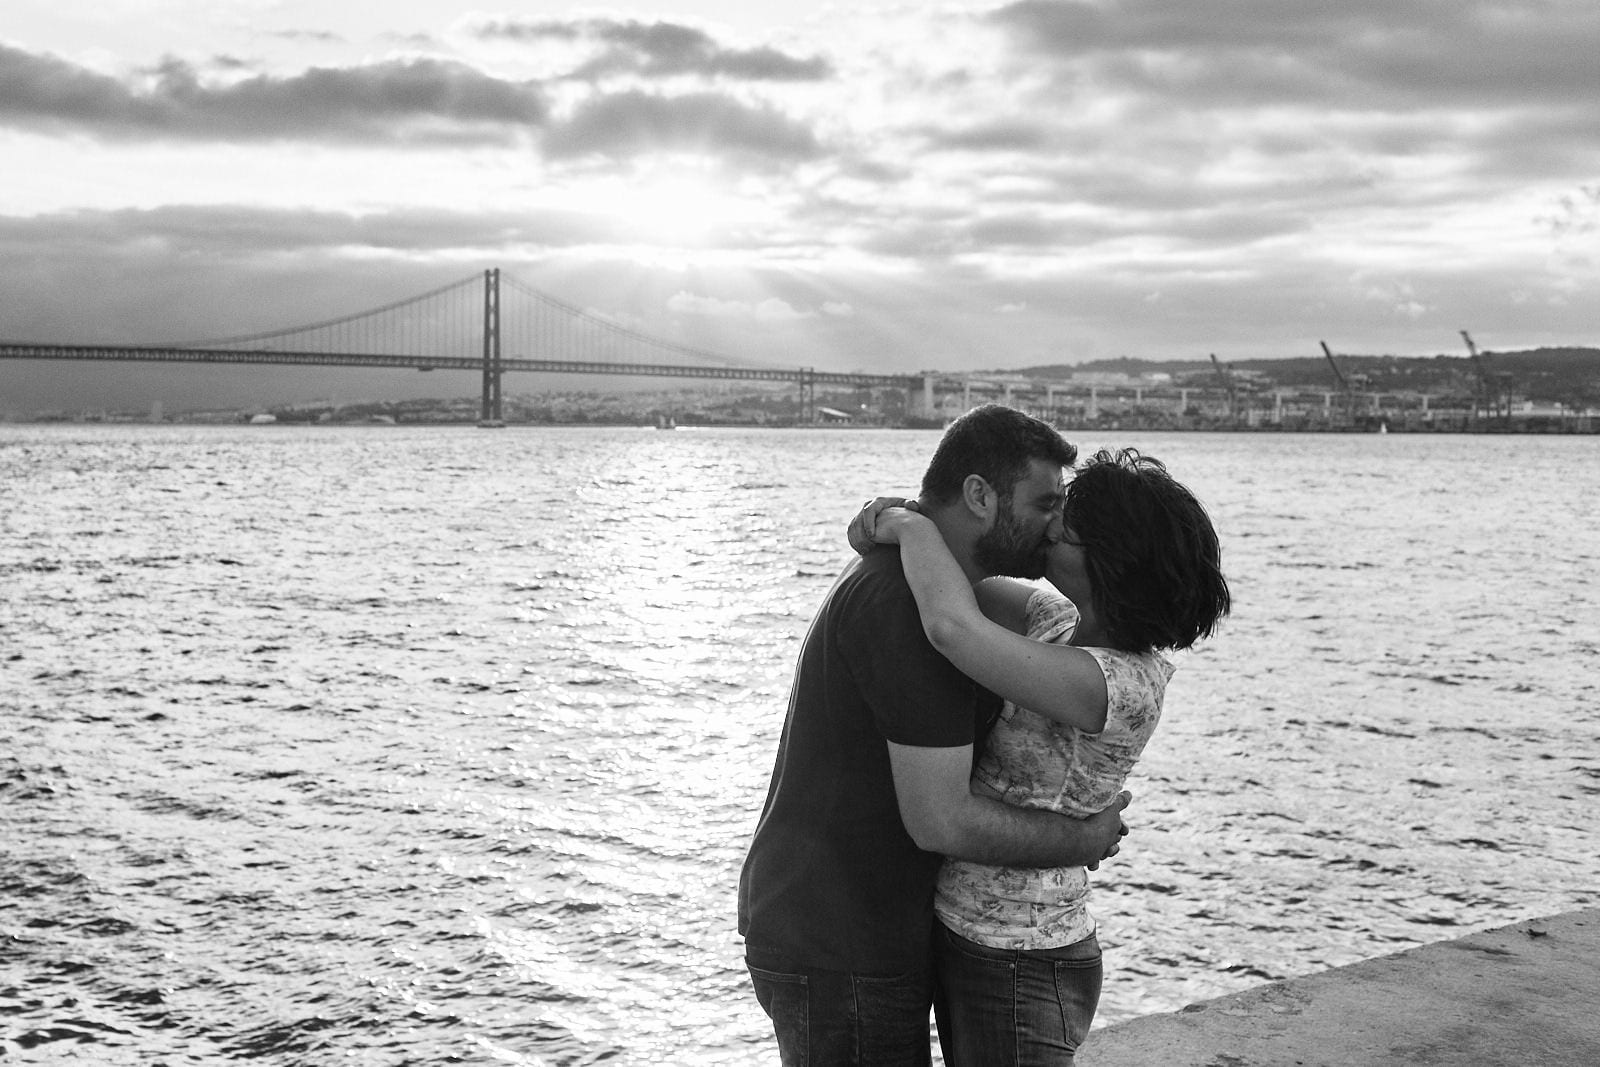 Lisbon Photographers Emanuele and Romana from Your Story in Photos in a romantic pose captured by one of their clients on the south bank of the Tejo river in Lisbon